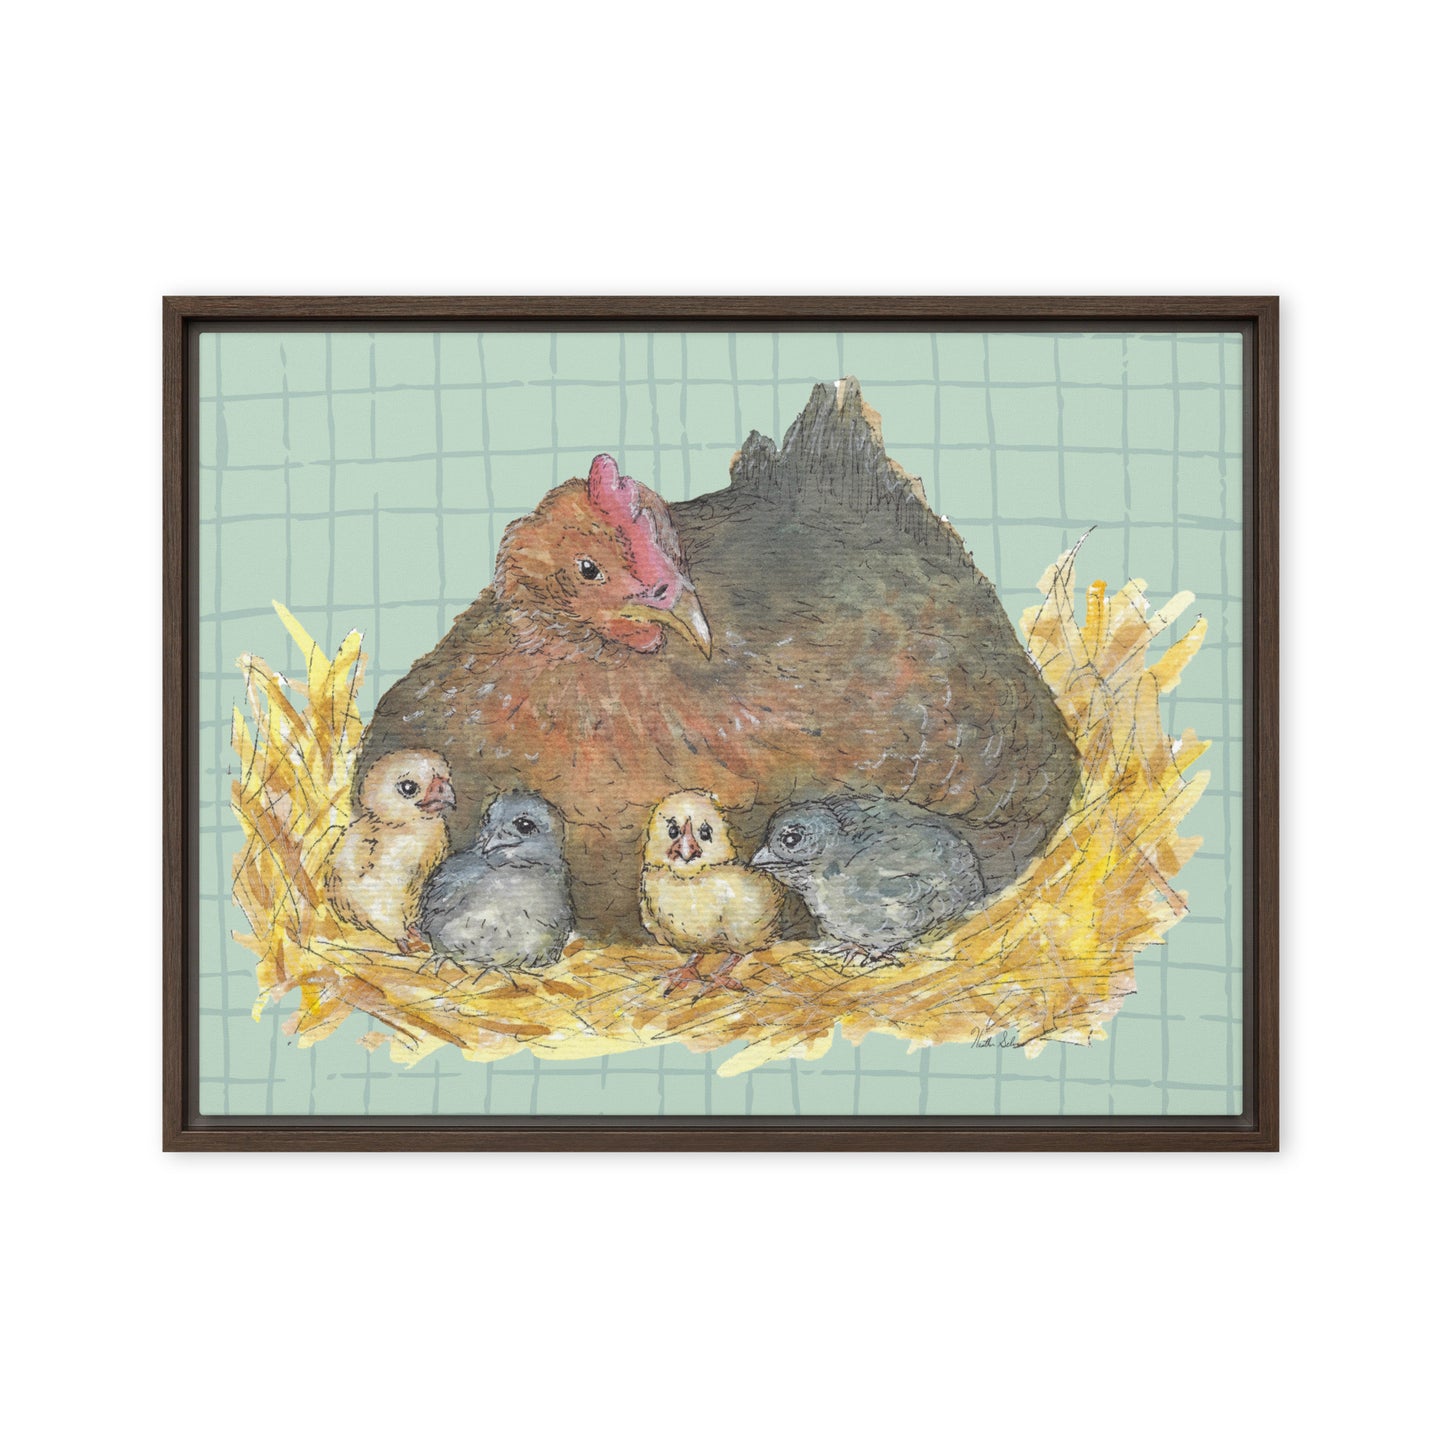 18 by 24 inch Mother Hen Floating Frame Canvas Wall Art. Heather Silver's watercolor painting, Mother Hen, with a green crosshatched background, printed on a stretched canvas and framed with a dark brown pine frame. Hanging hardware included.